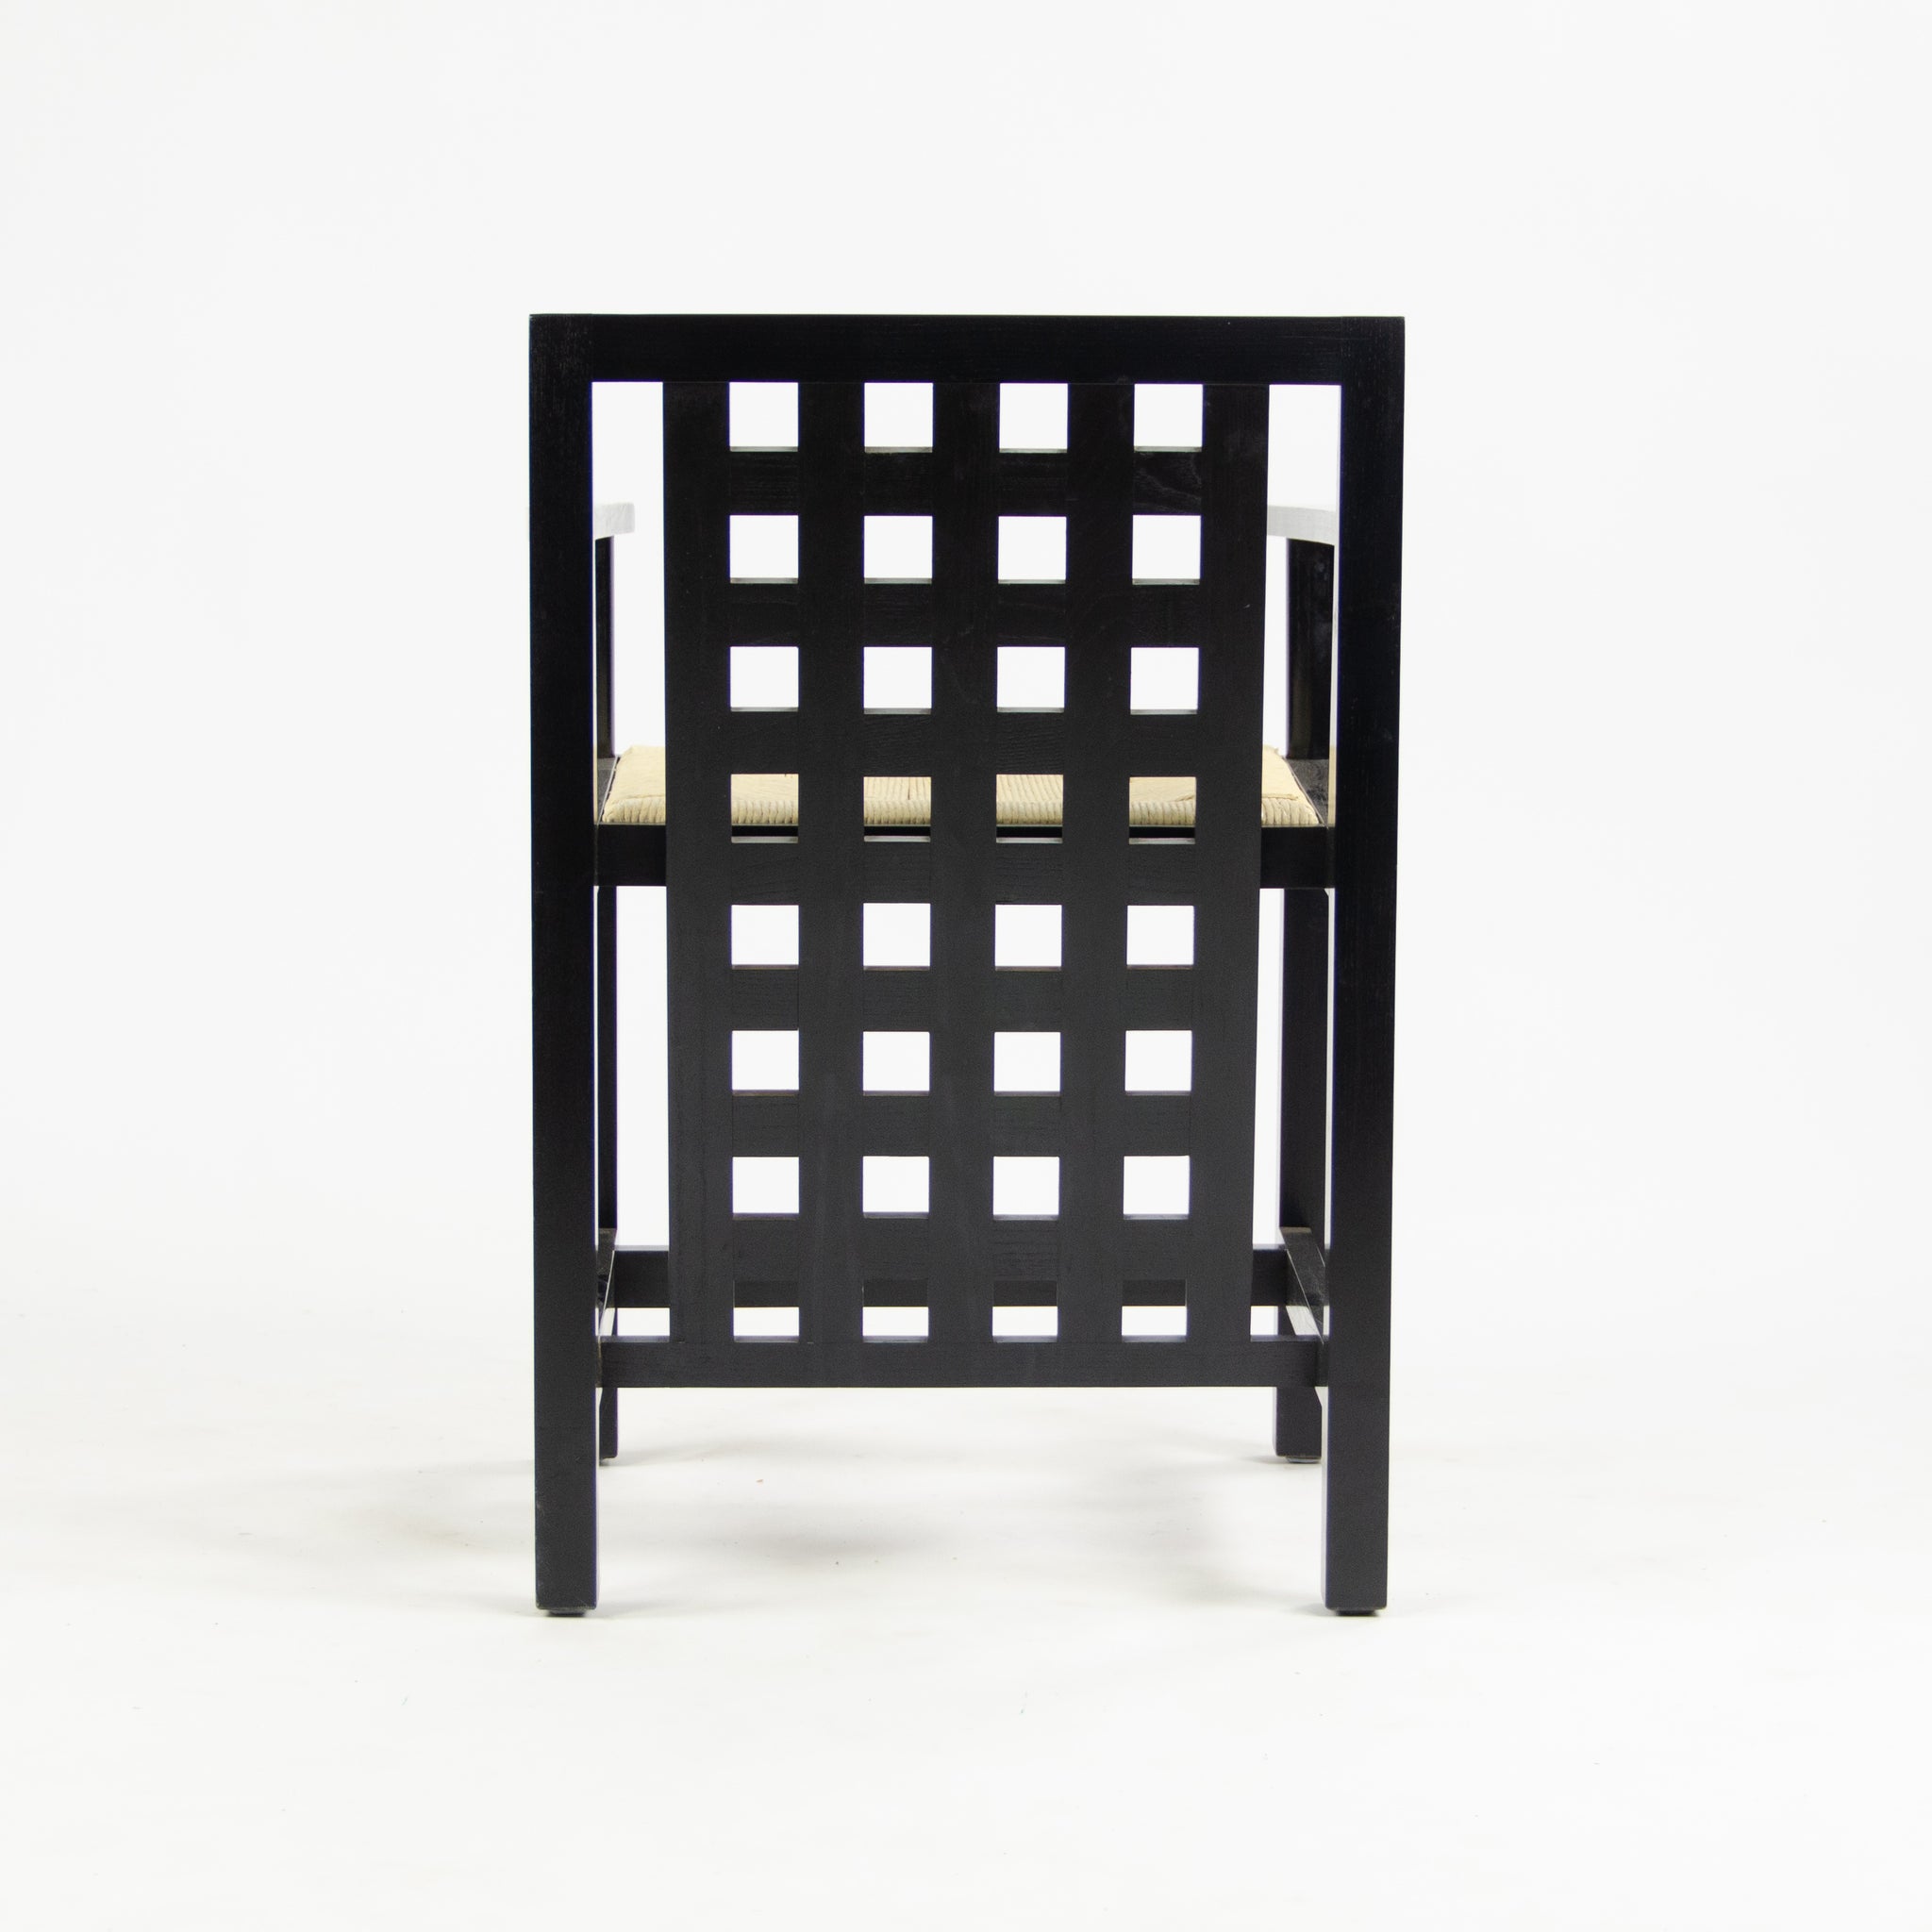 SOLD Charles Rennie Mackintosh Set of Six 324 DS3 Chairs + Dining Table Set Cassina